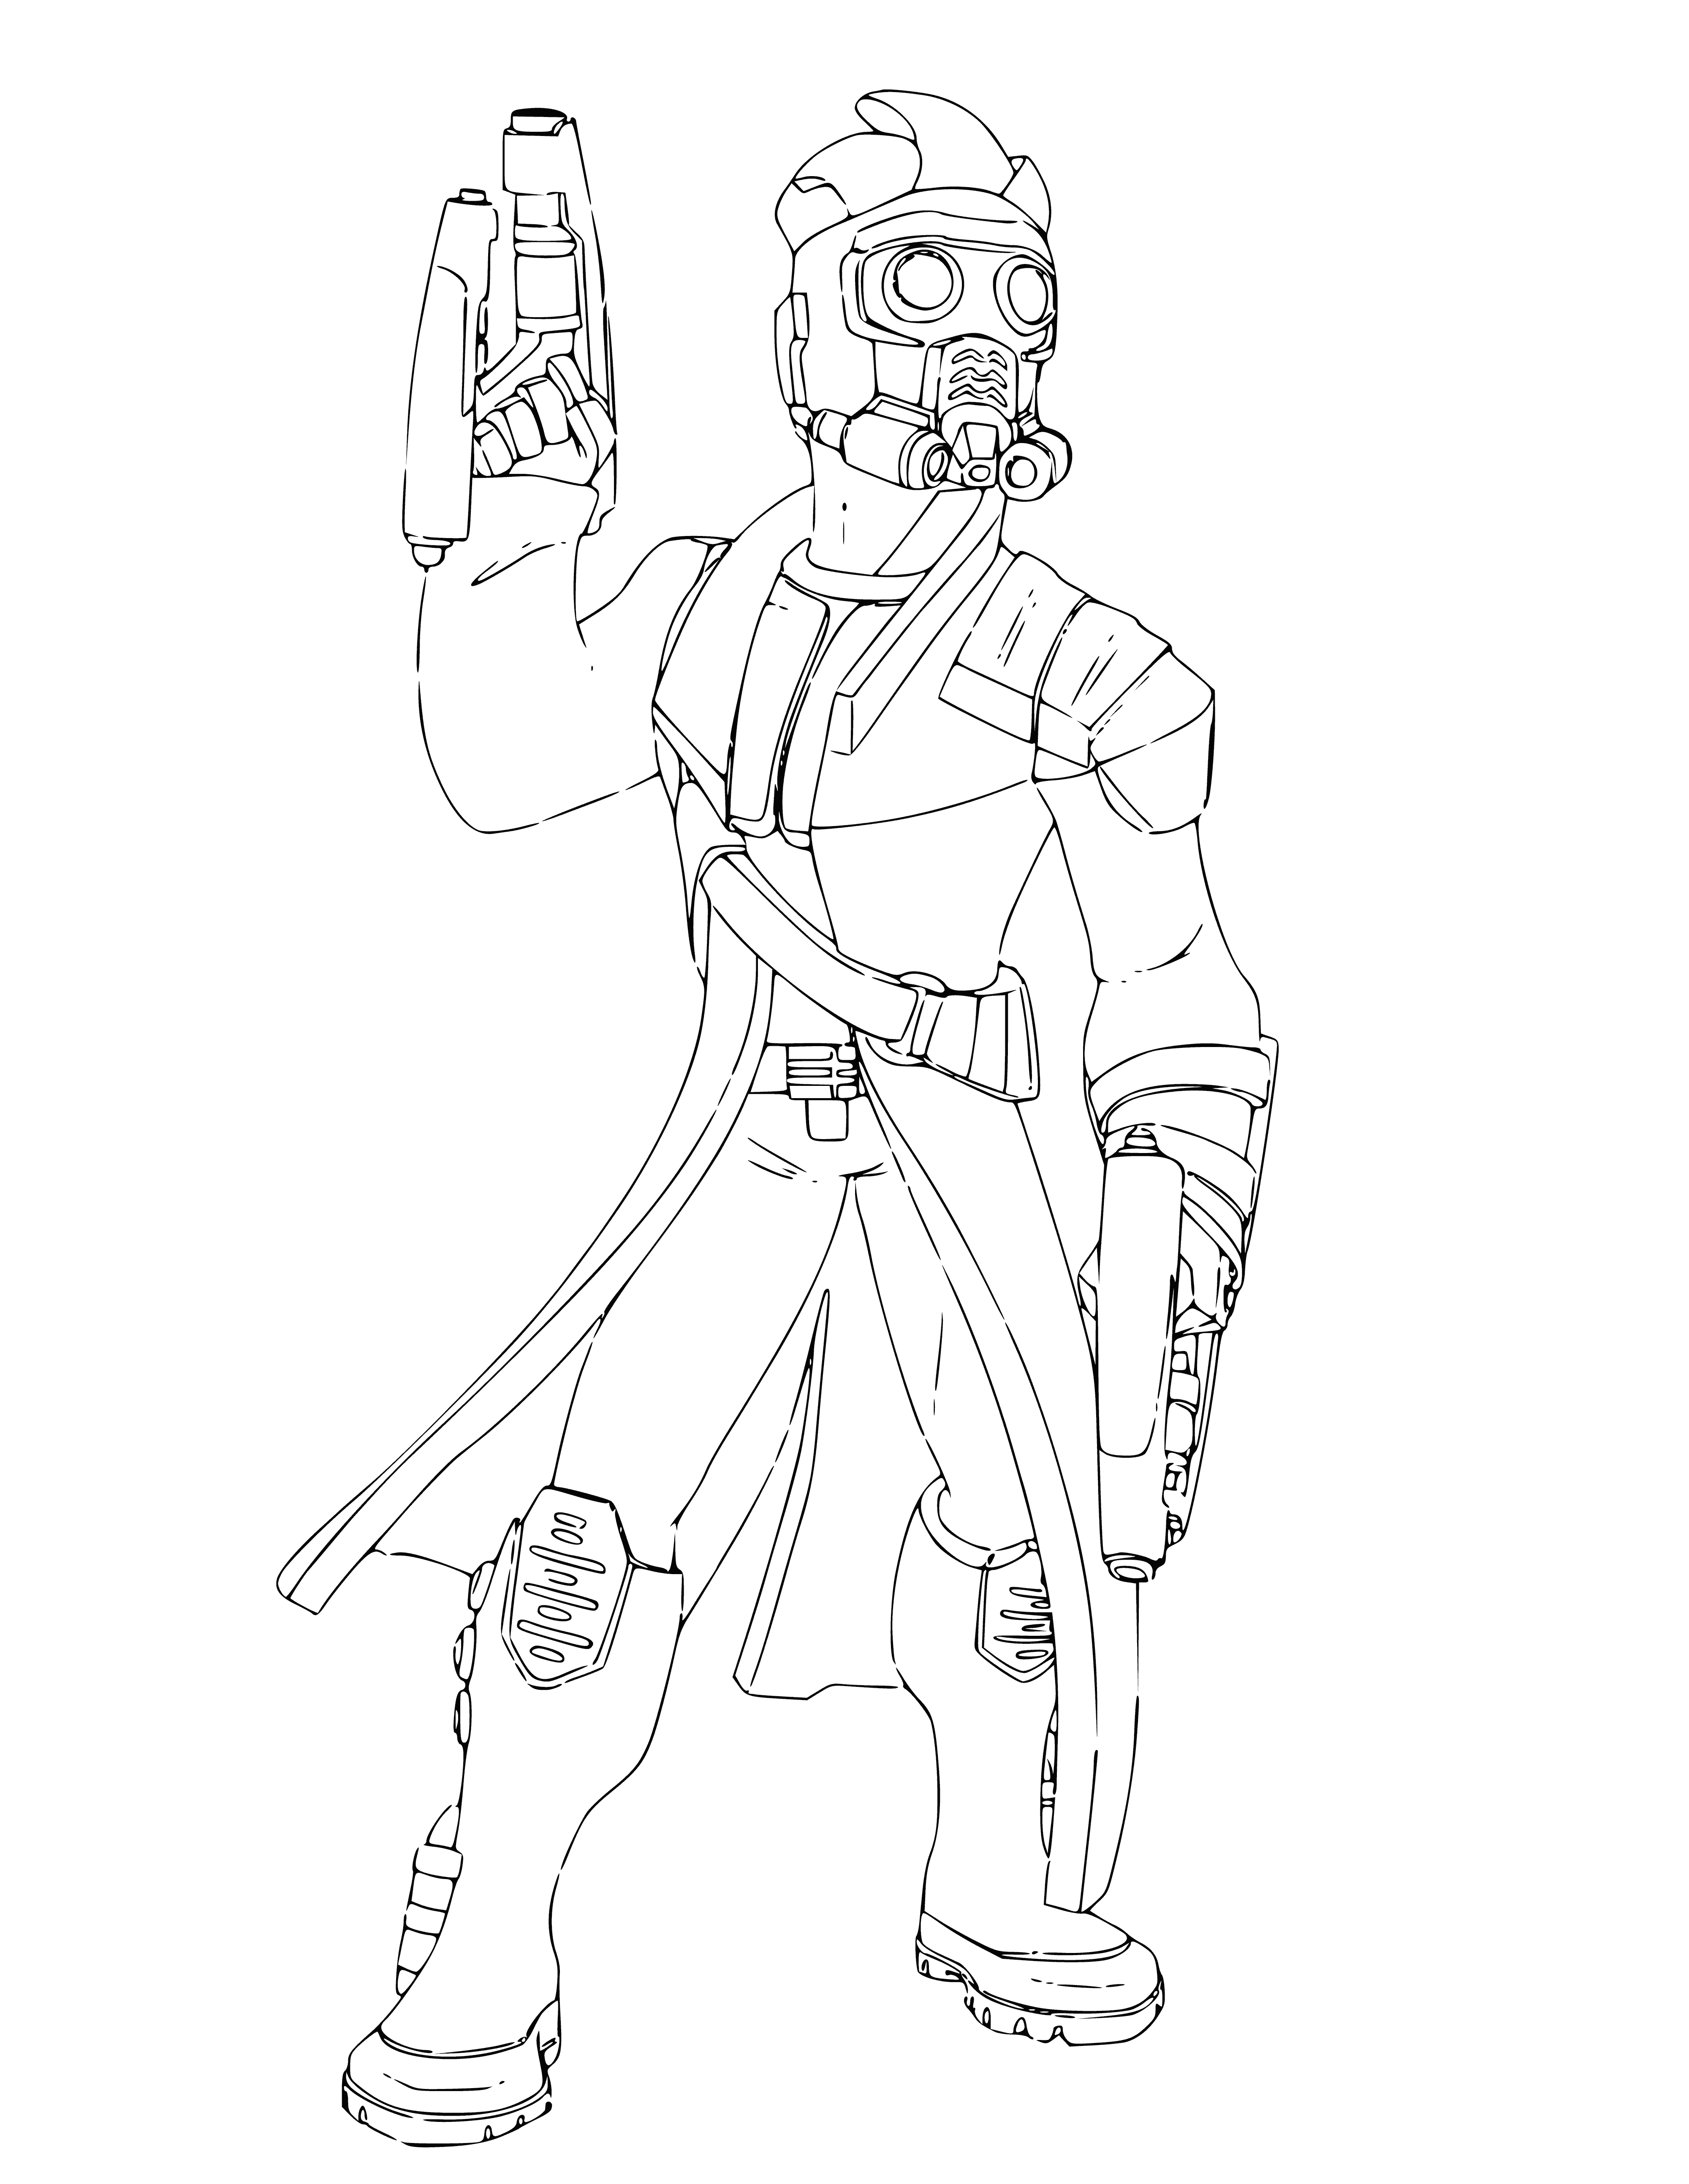 Star lord coloring page